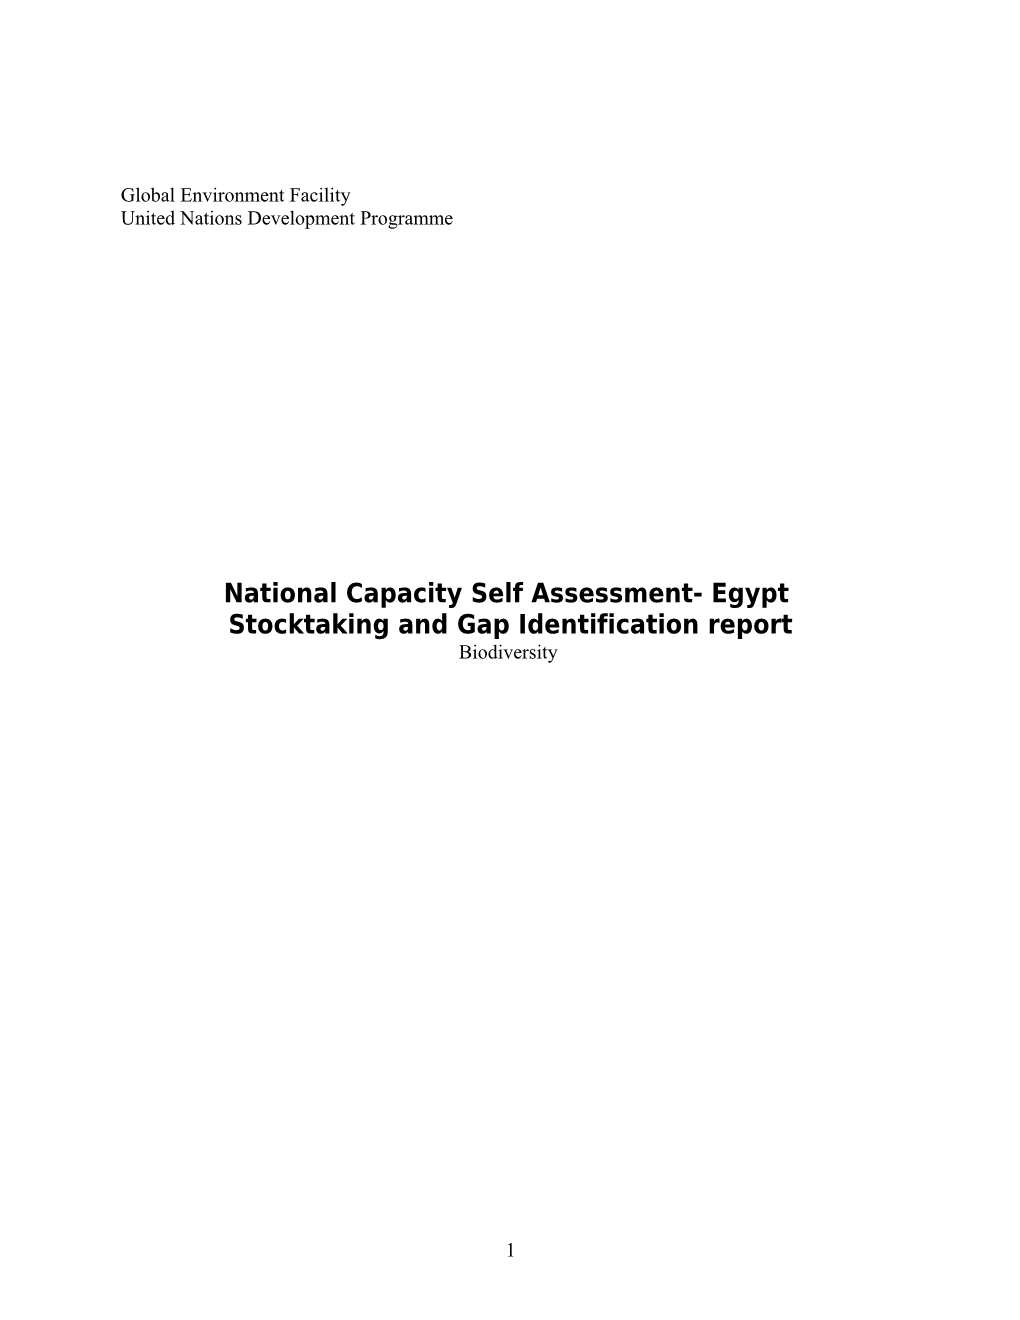 Stocktaking and Gap Identification Report for the UNCBD